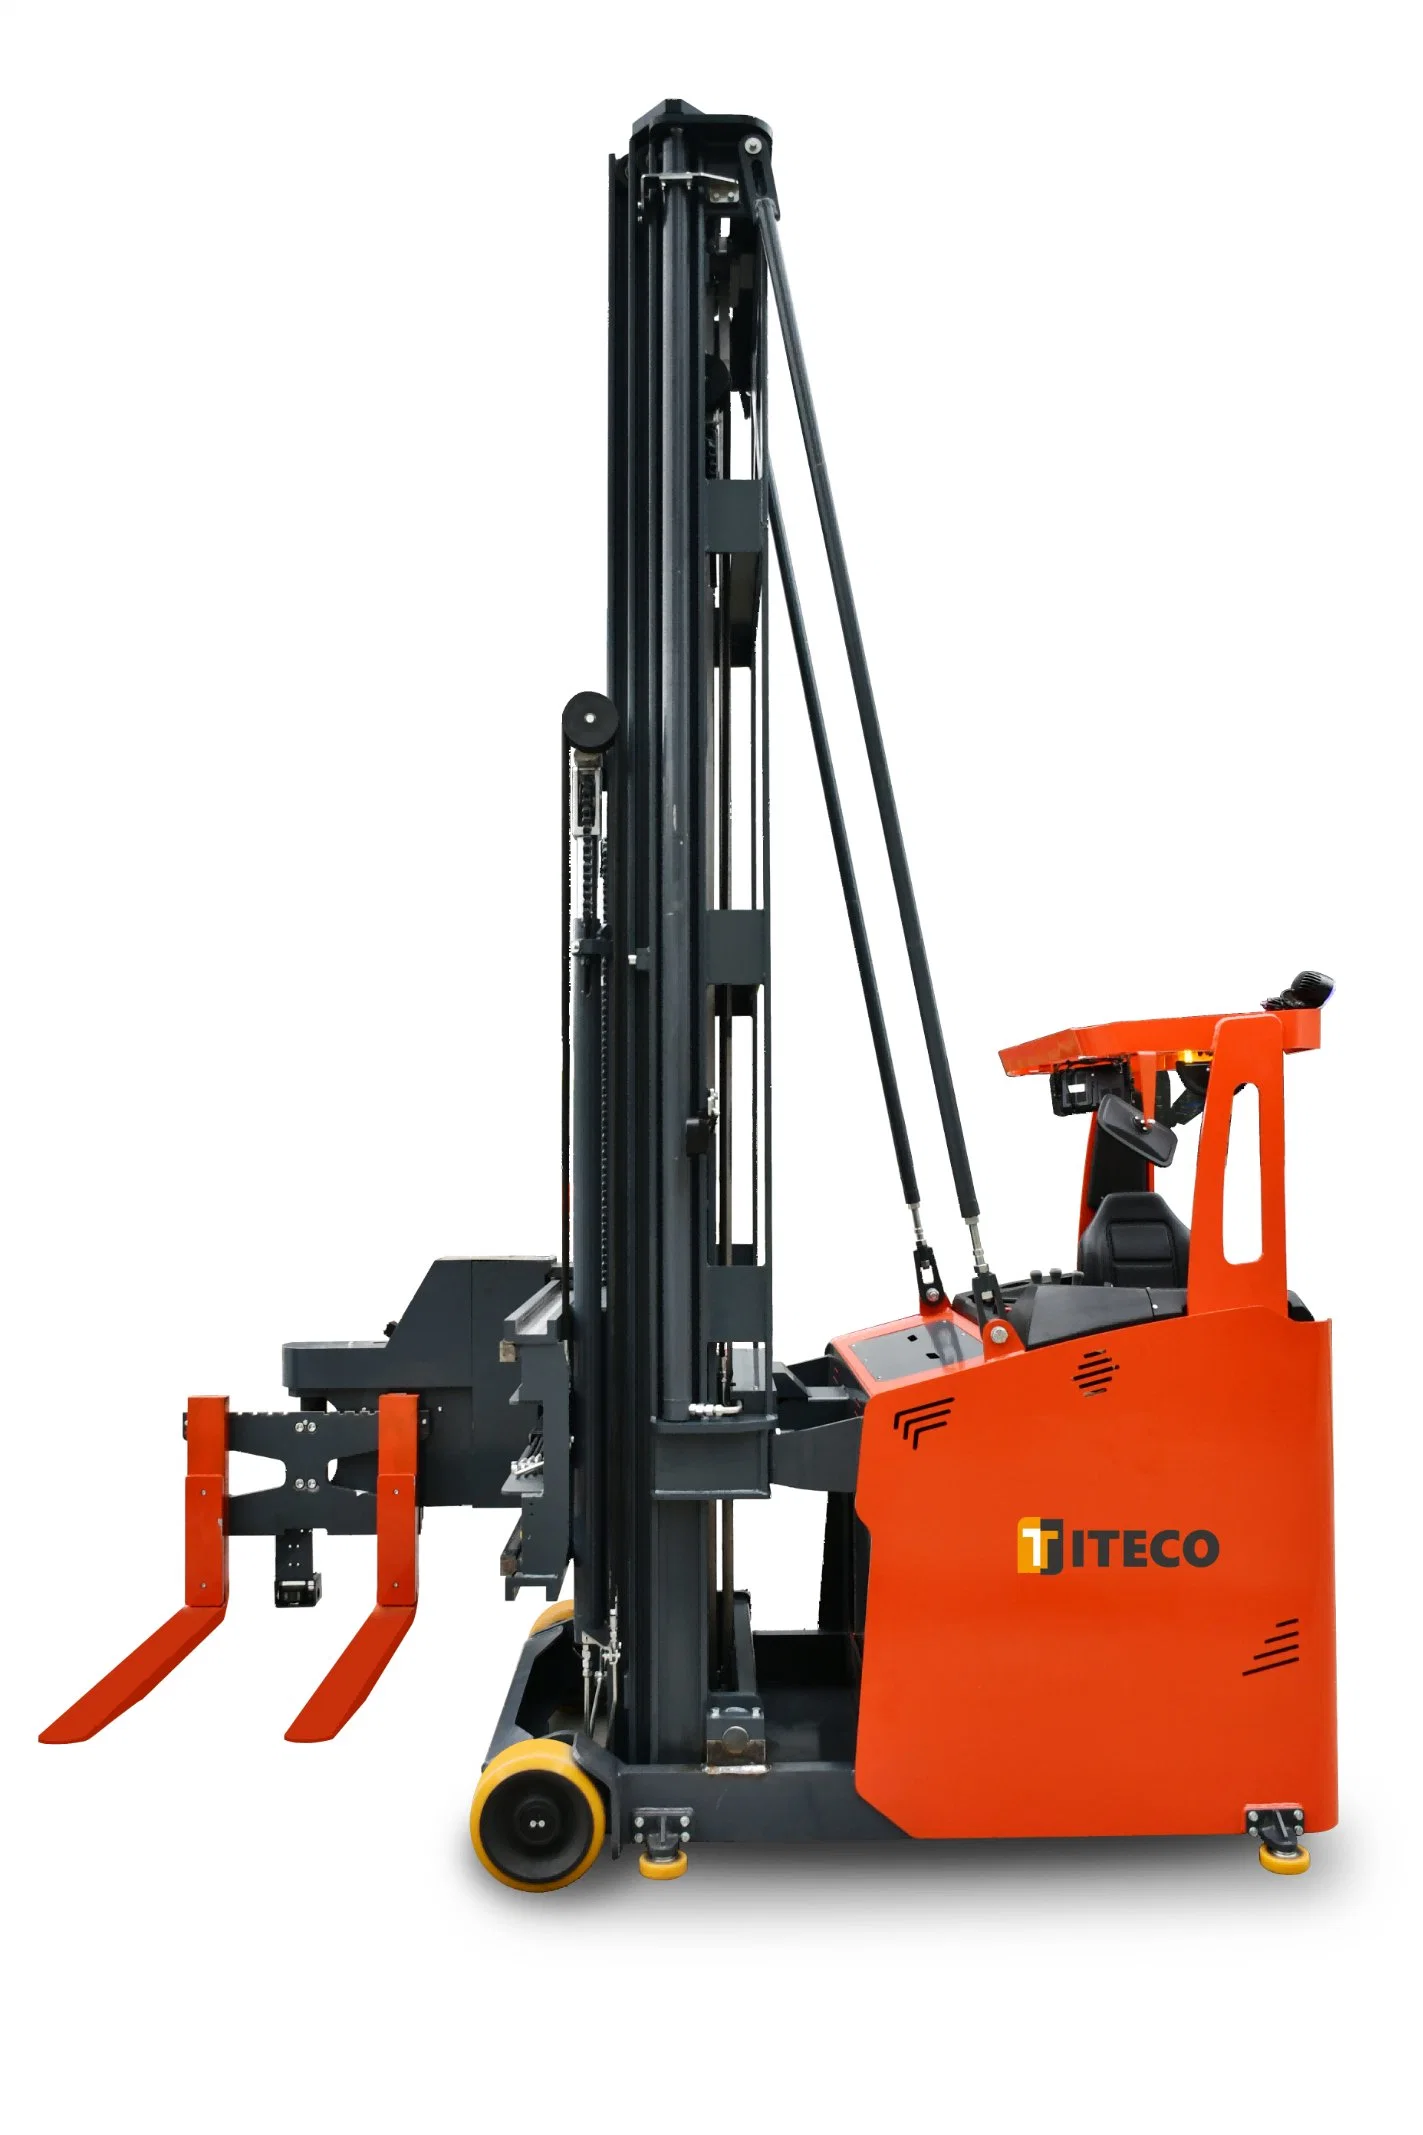 Mc10 Mini 1t Forklift 3m Mast 3-Ways Electric Pallet Stacker Vna Forklift Widely Used in Warehouse